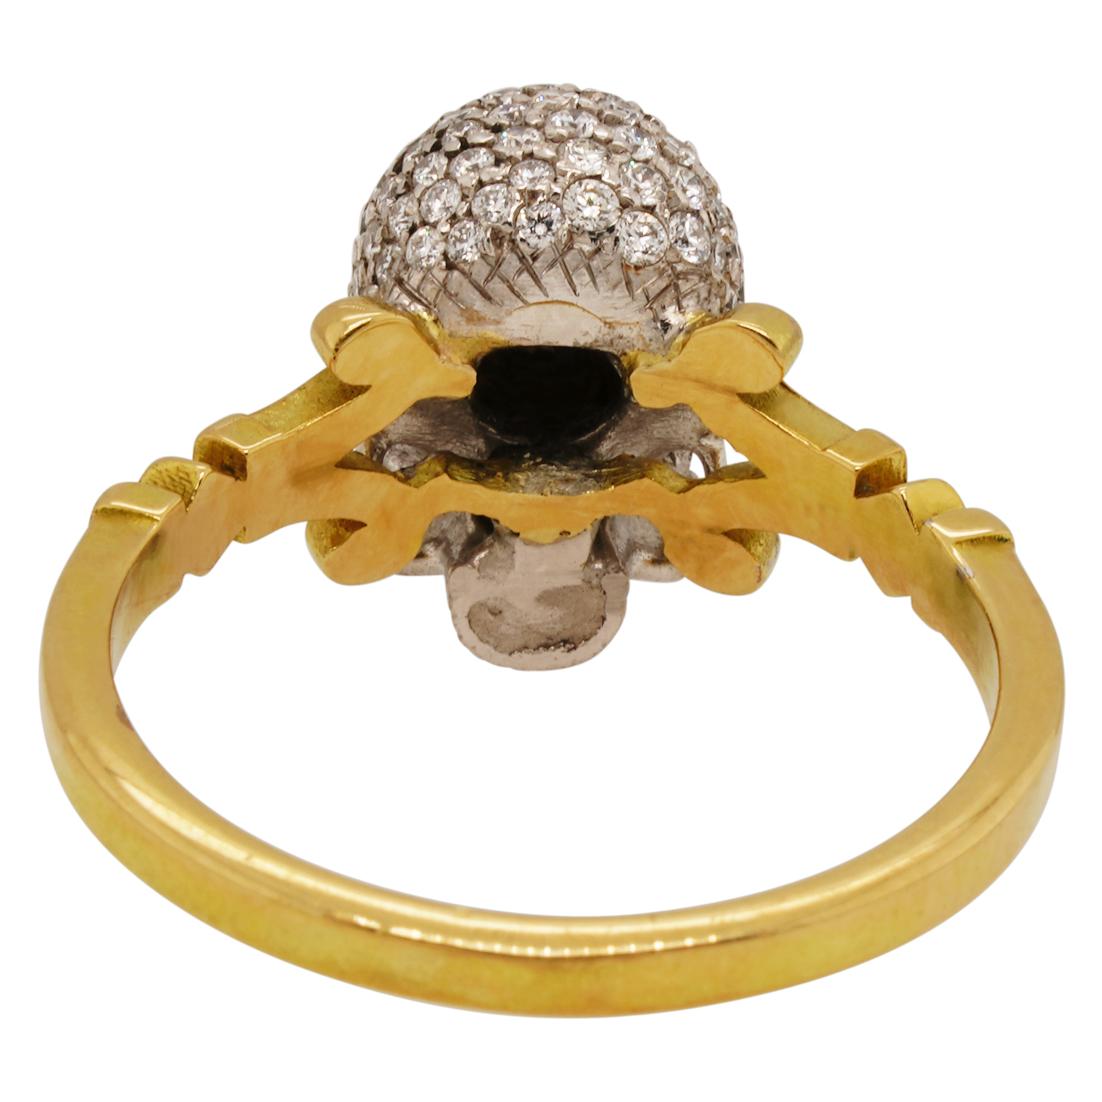 Catacomb Saint Diamond Encrusted Skull Ring in 18kt Gold with Diamonds & Rubies For Sale 11